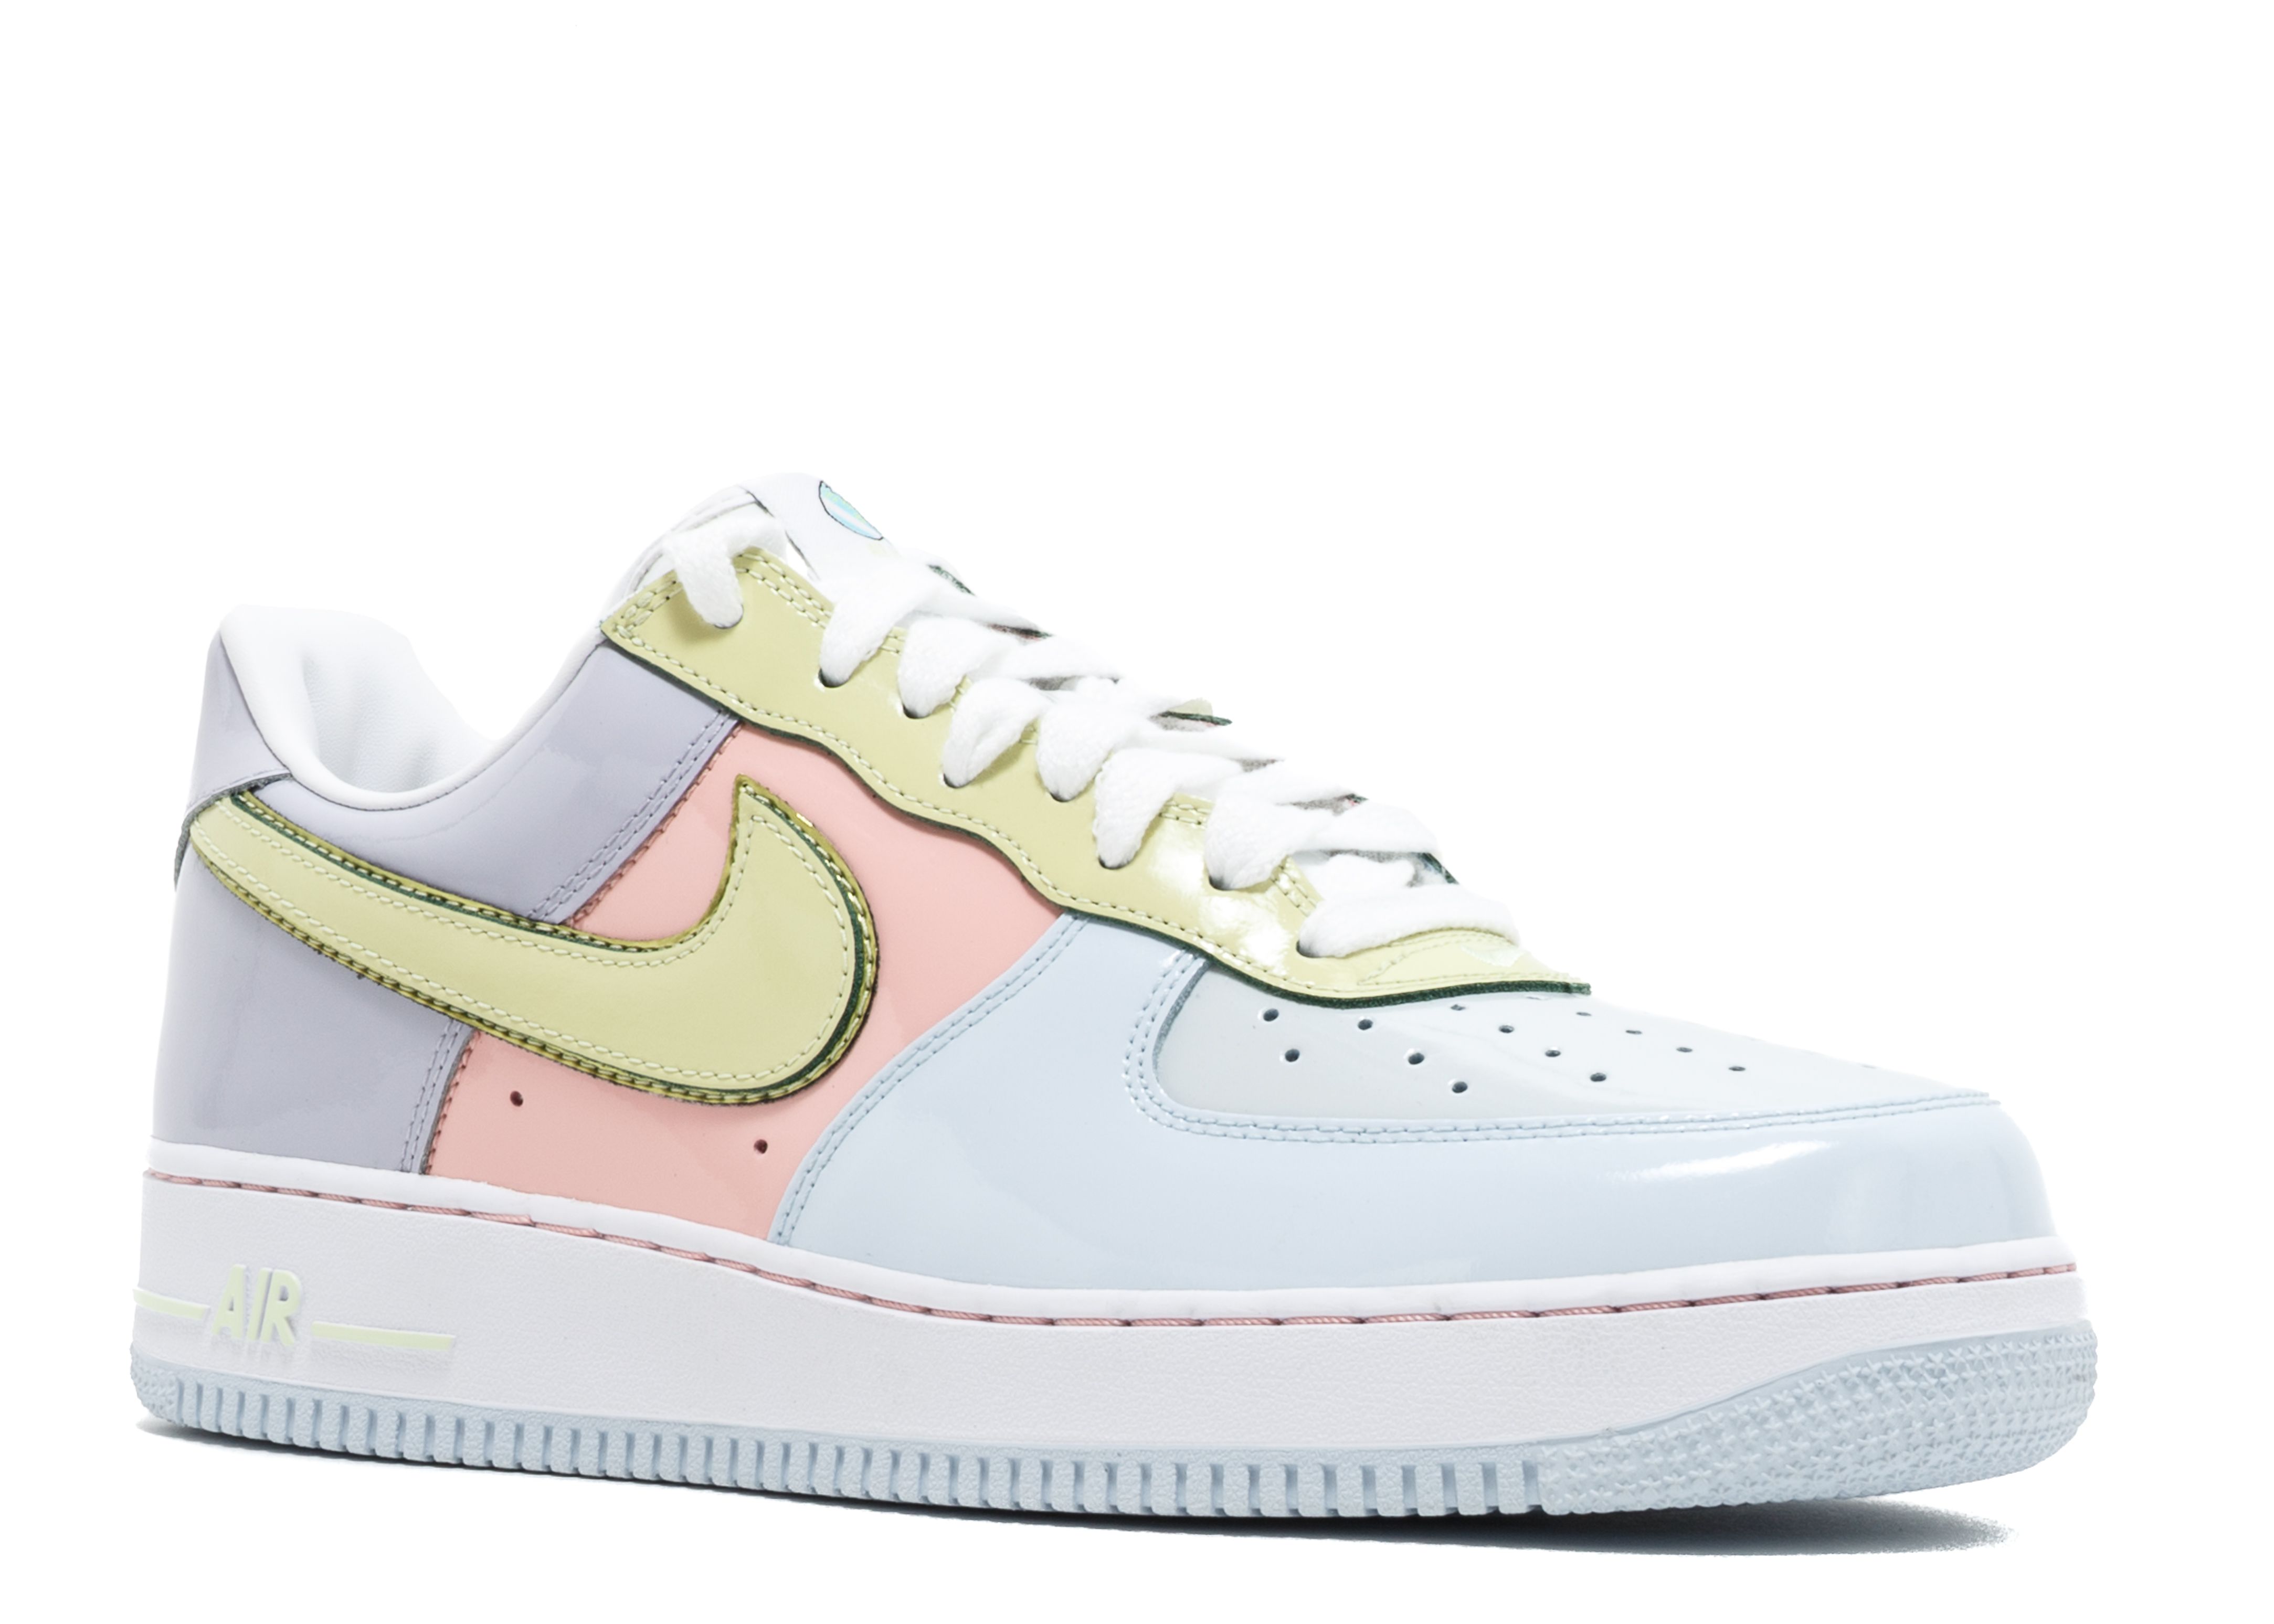 Lying attack Asser Air Force 1 Low Retro 'Easter' 2017 - Nike - 845053 500 - titanium/lime  ice/storm pink | Flight Club